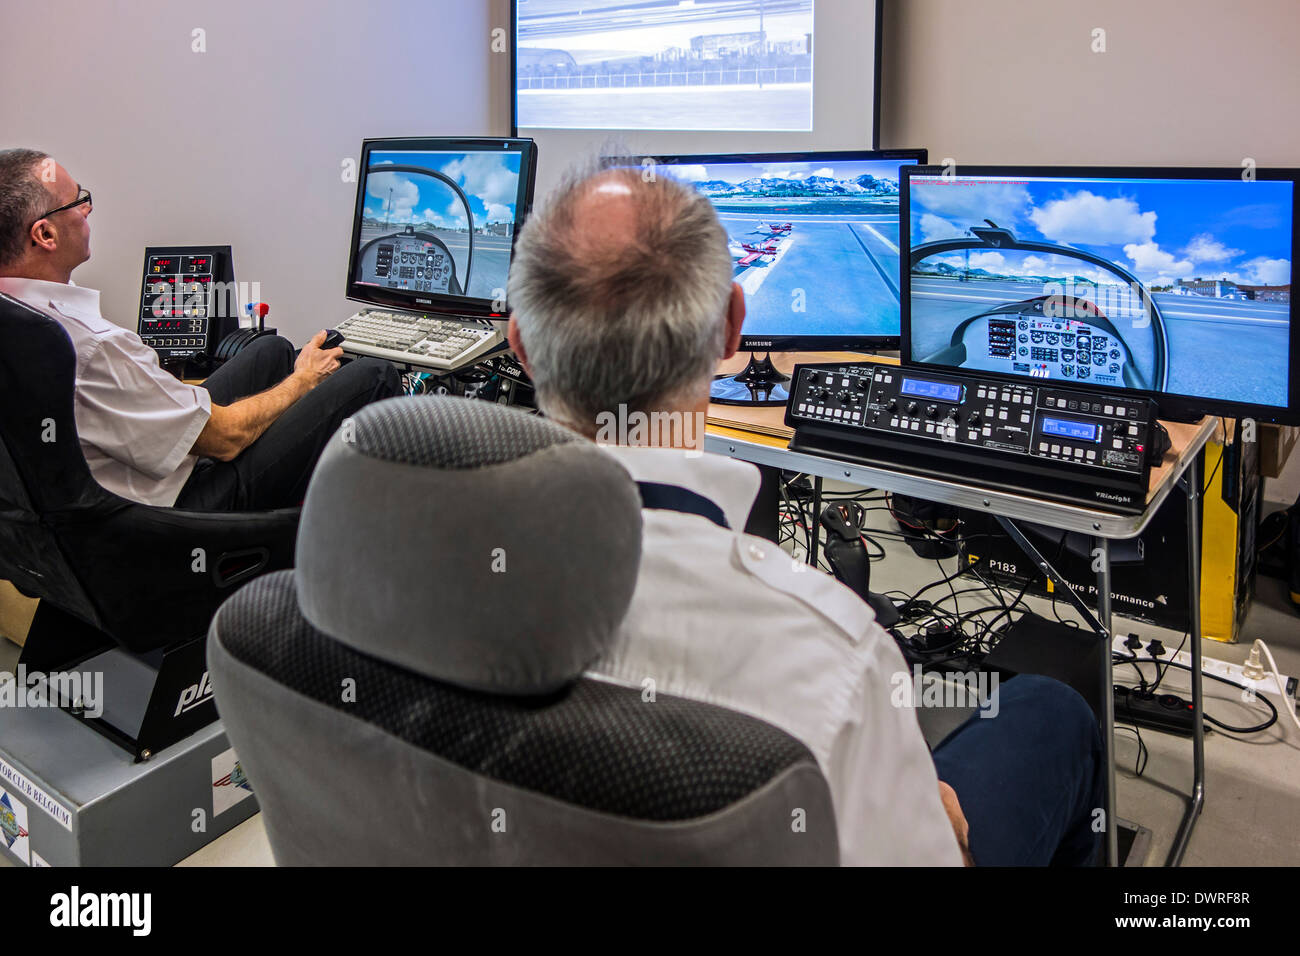 Two men navigating virtual airplanes in amateur flight simulator on home computers Stock Photo